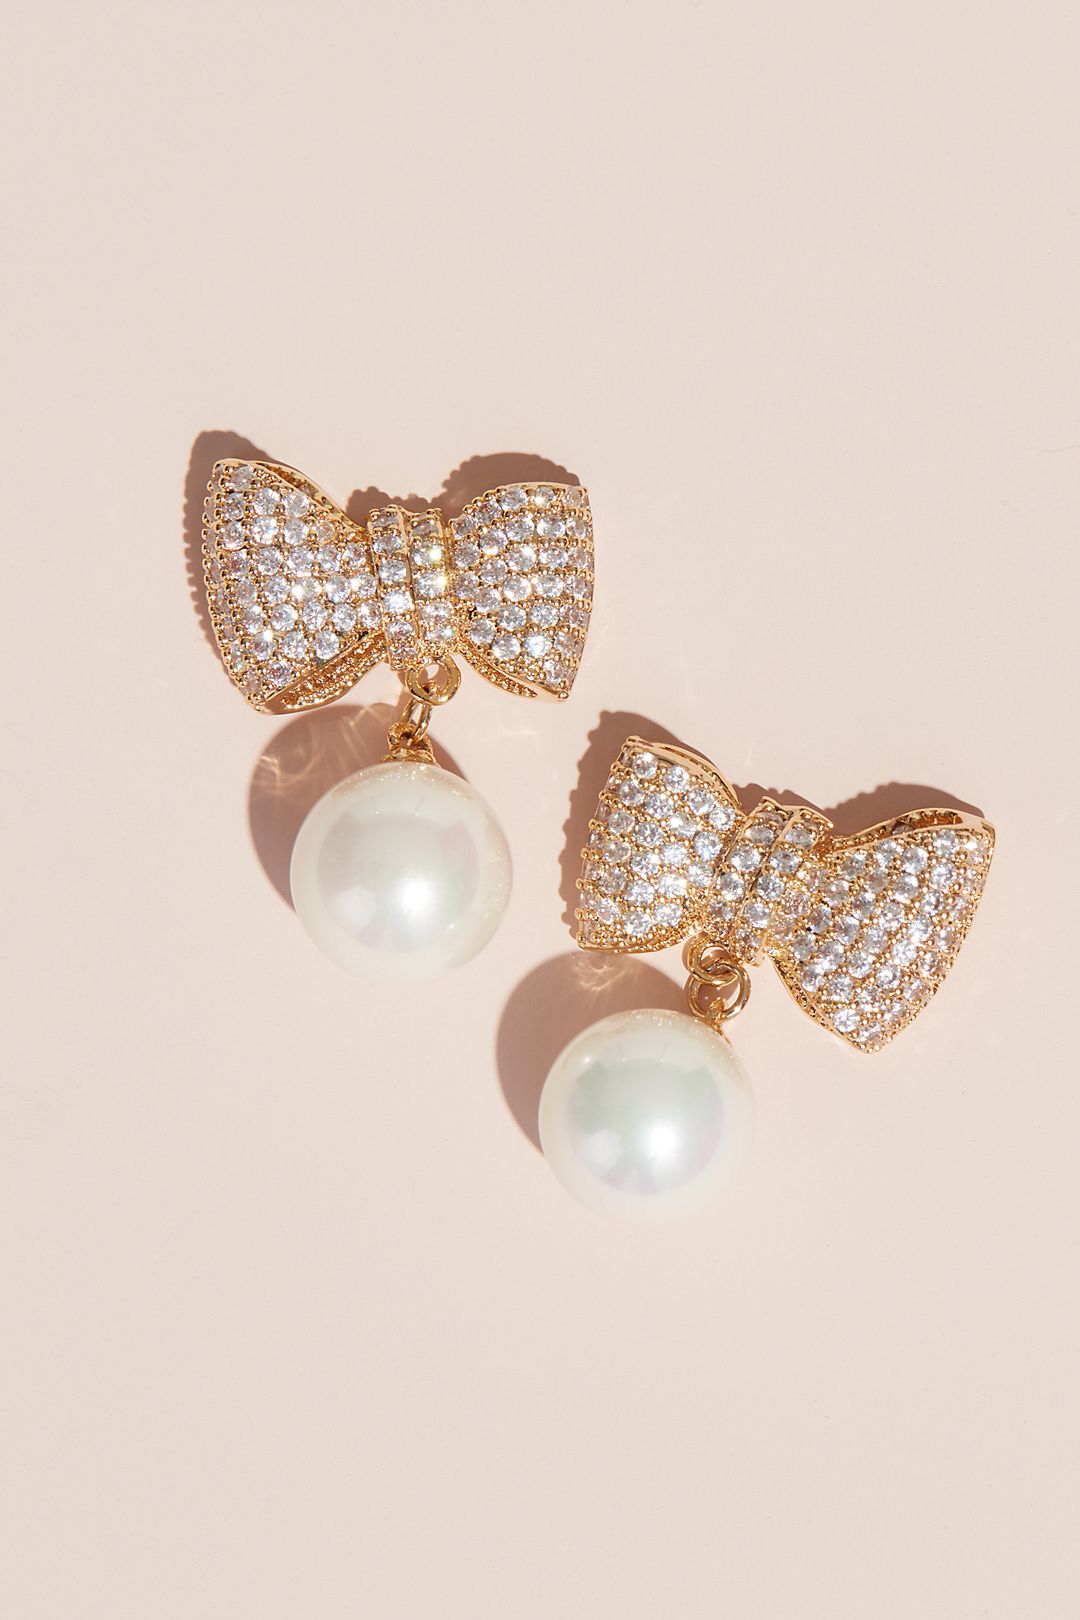 Crystal and Pearl Bow Cubic Zirconia Stud Earrings Image 3